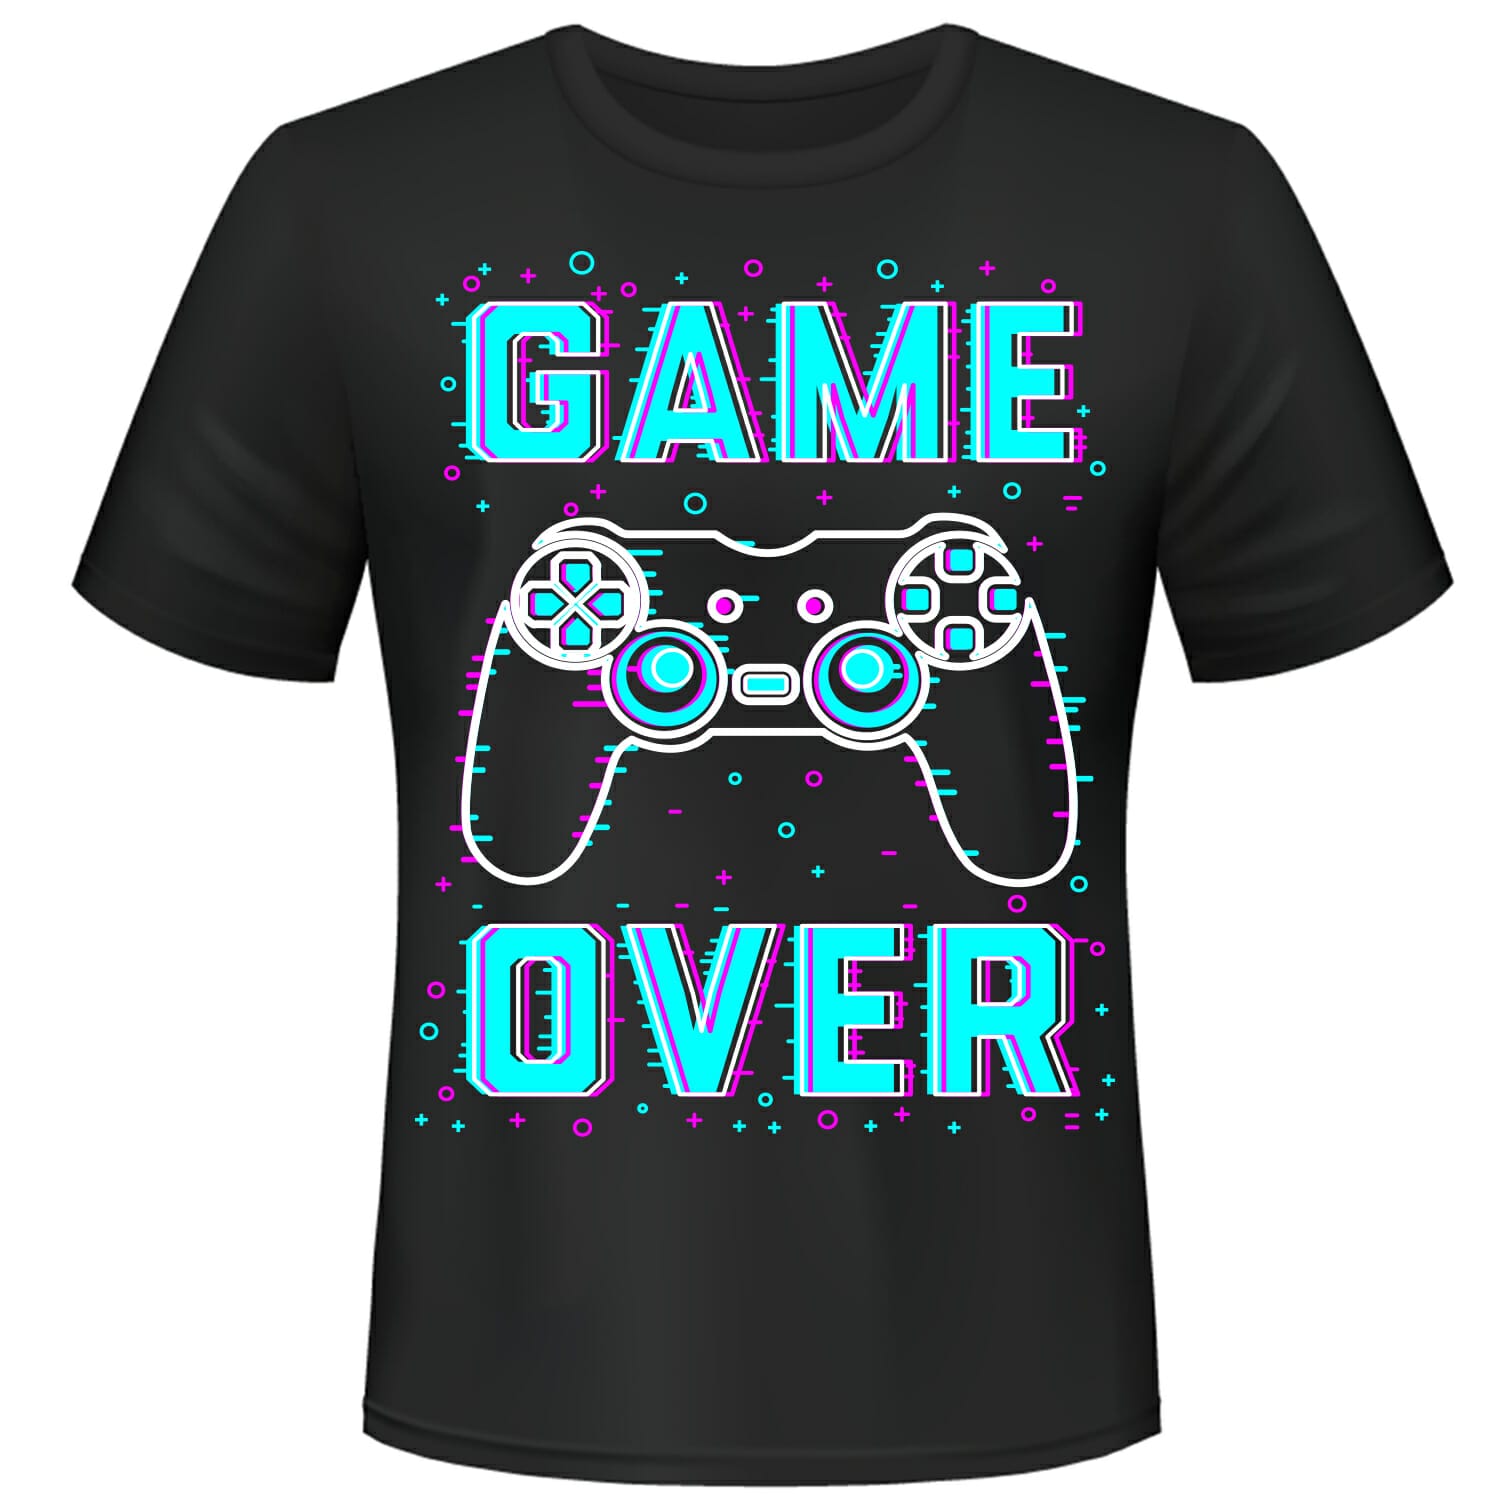 game over T-shirt design